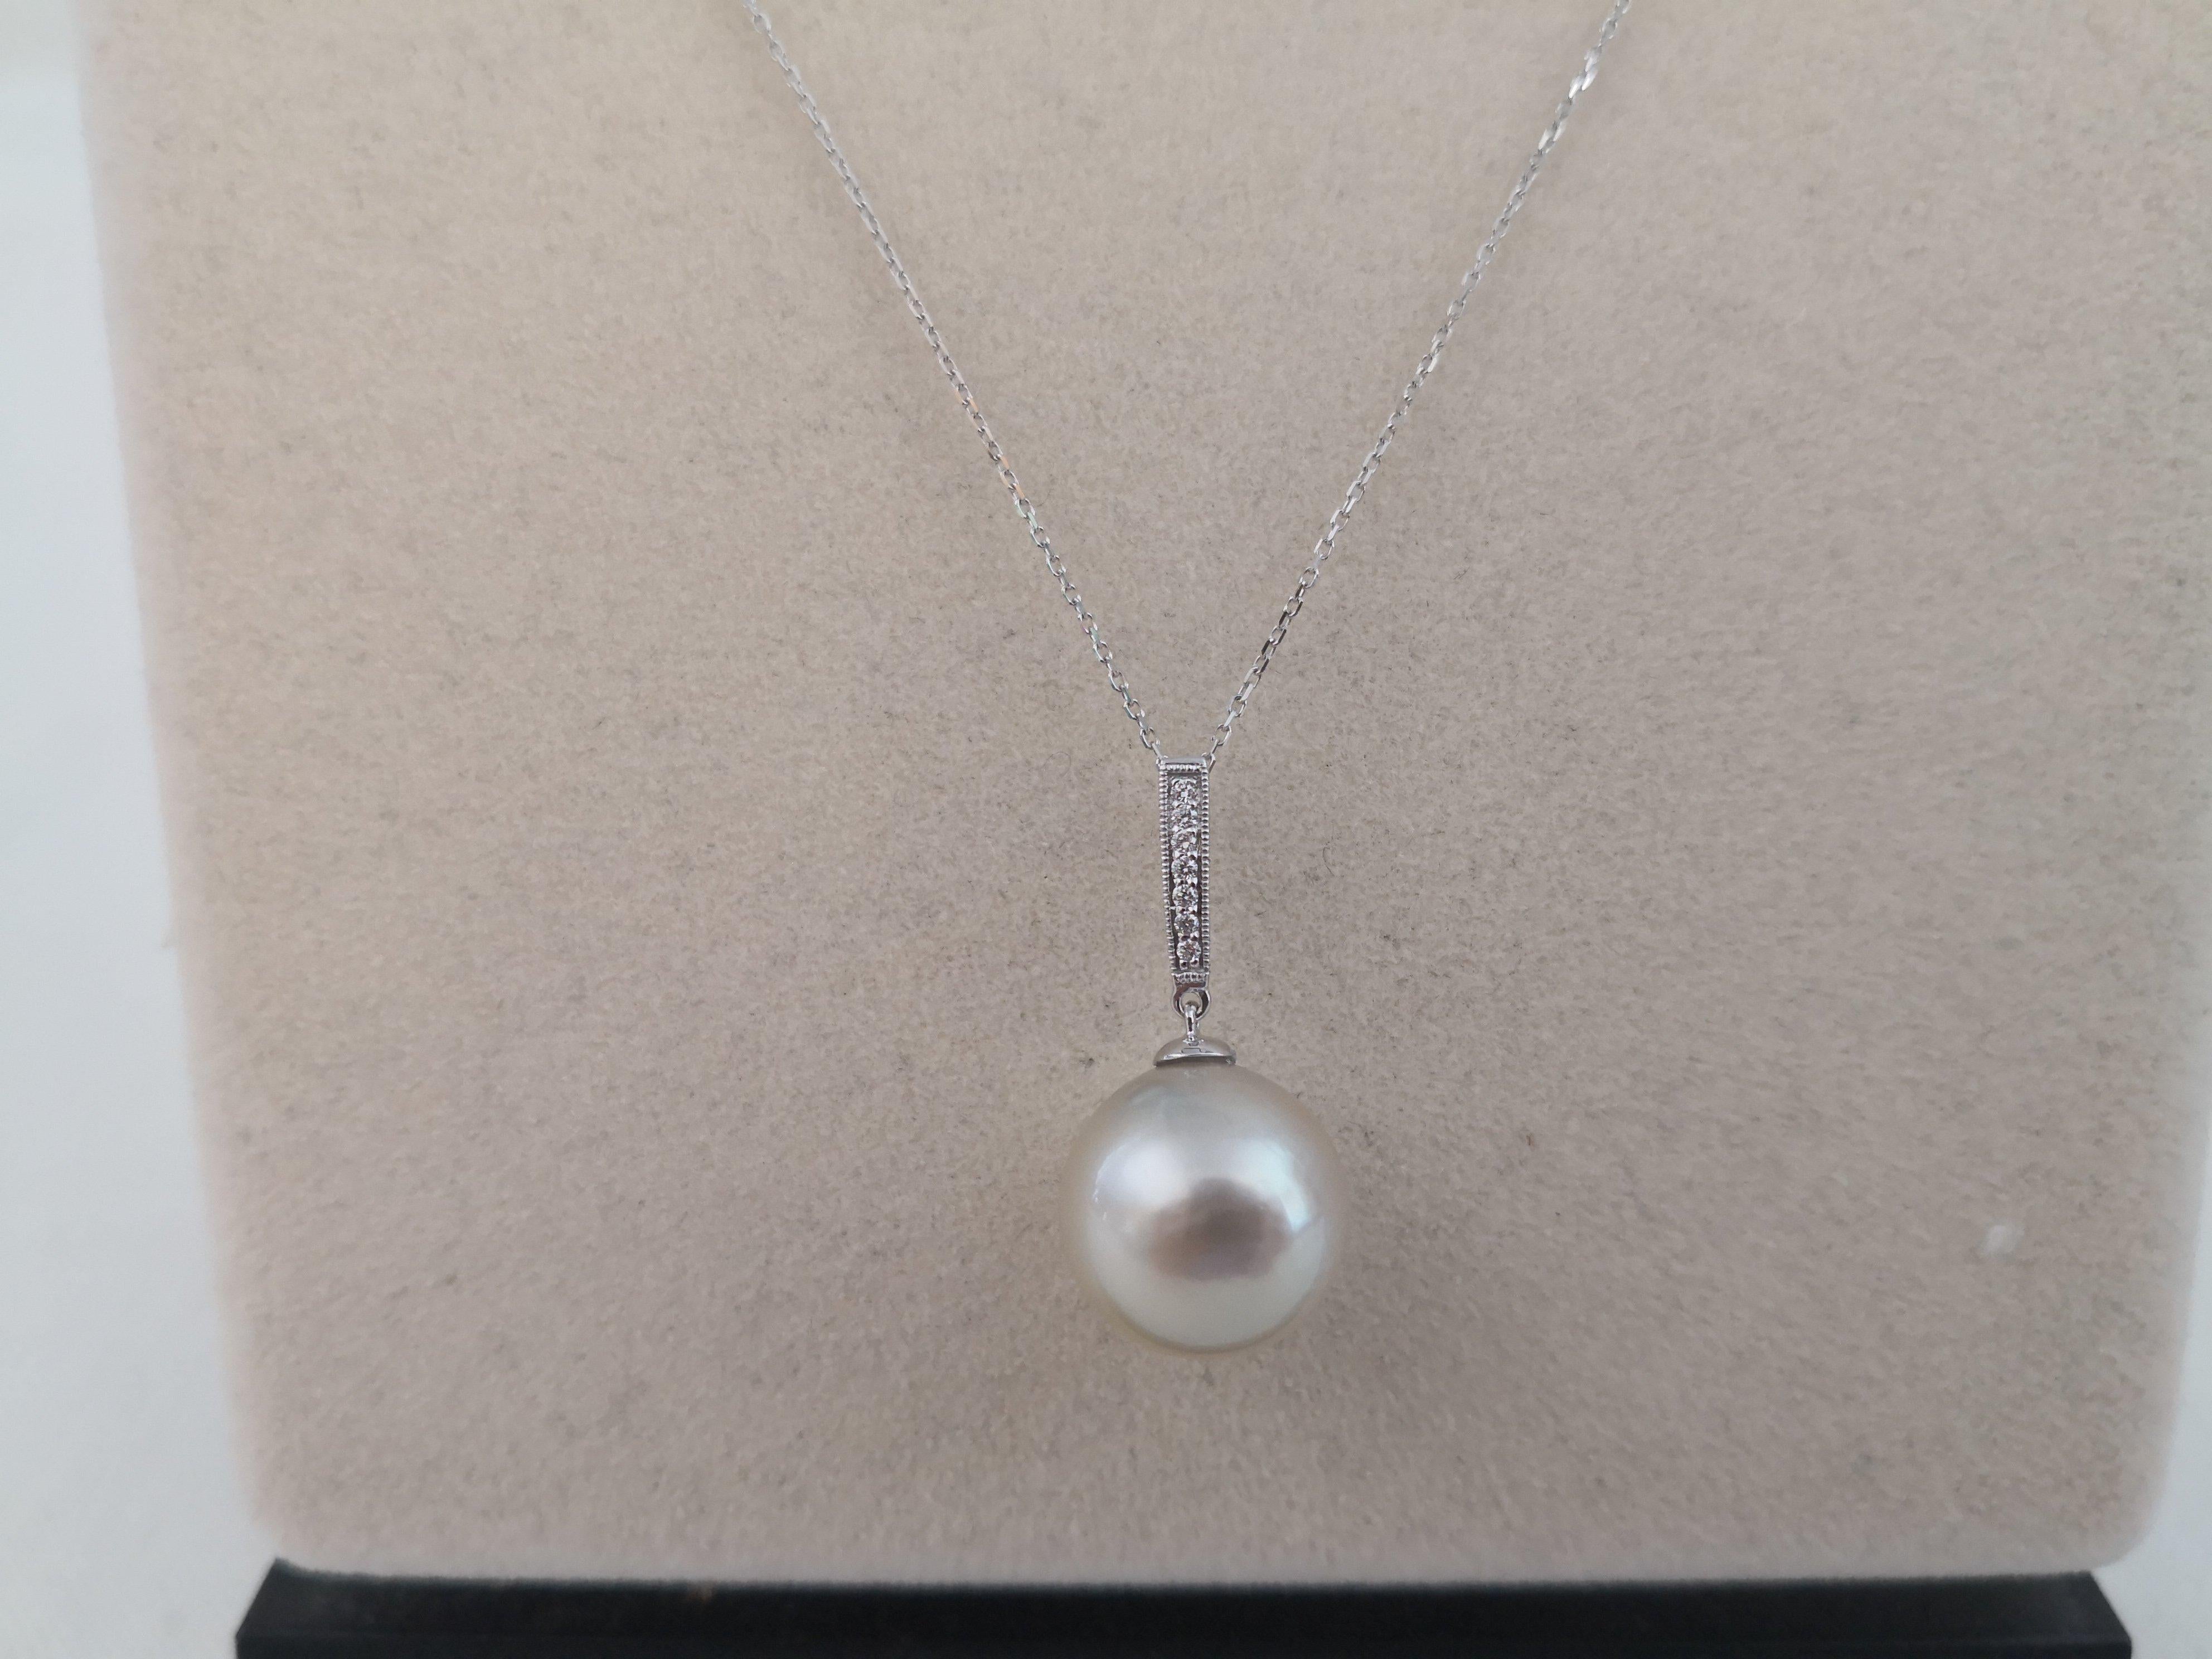 A Natural Color South Sea Pearl Pendant necklace

- Size of Pearl 13 mm mm of diameter

- Pearl from Pinctada Maxima Oyster

- Origin: Indonesia ocean waters

- Natural White Color pearl

- Natural luster and orient

- Pearls of Near Round shape

-